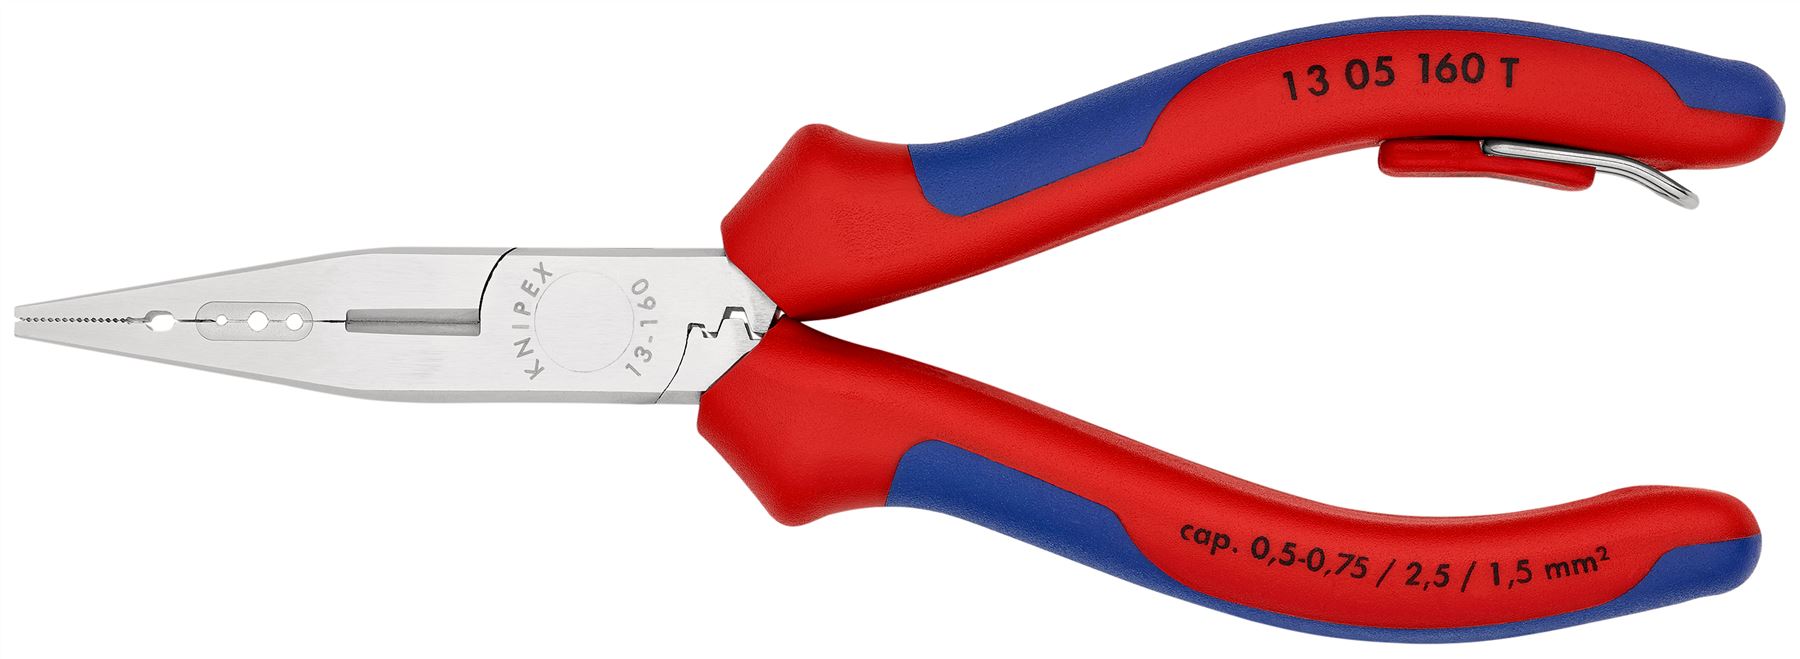 Knipex Electricians Pliers 160mm Multi Component Grips Chrome Plated with Tether Point 13 05 160 T